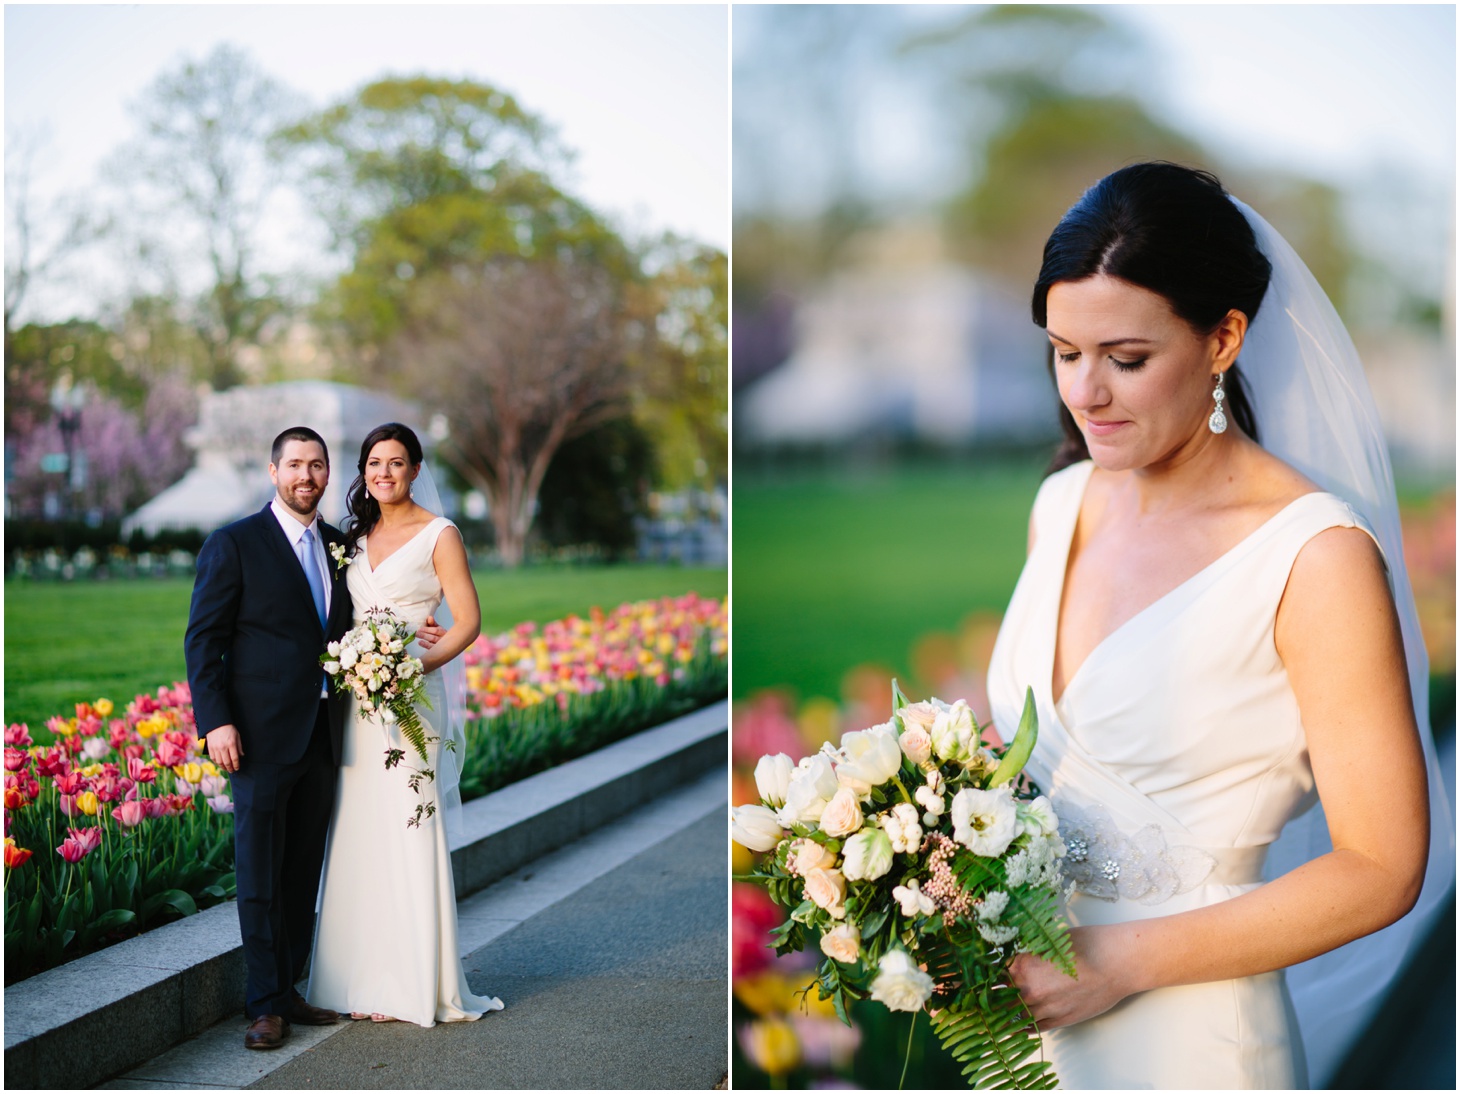 Mikey & Megan, Downtown DC Wedding at National Museum of Women in the Arts by Sarah Bradshaw Photography_0038.jpg